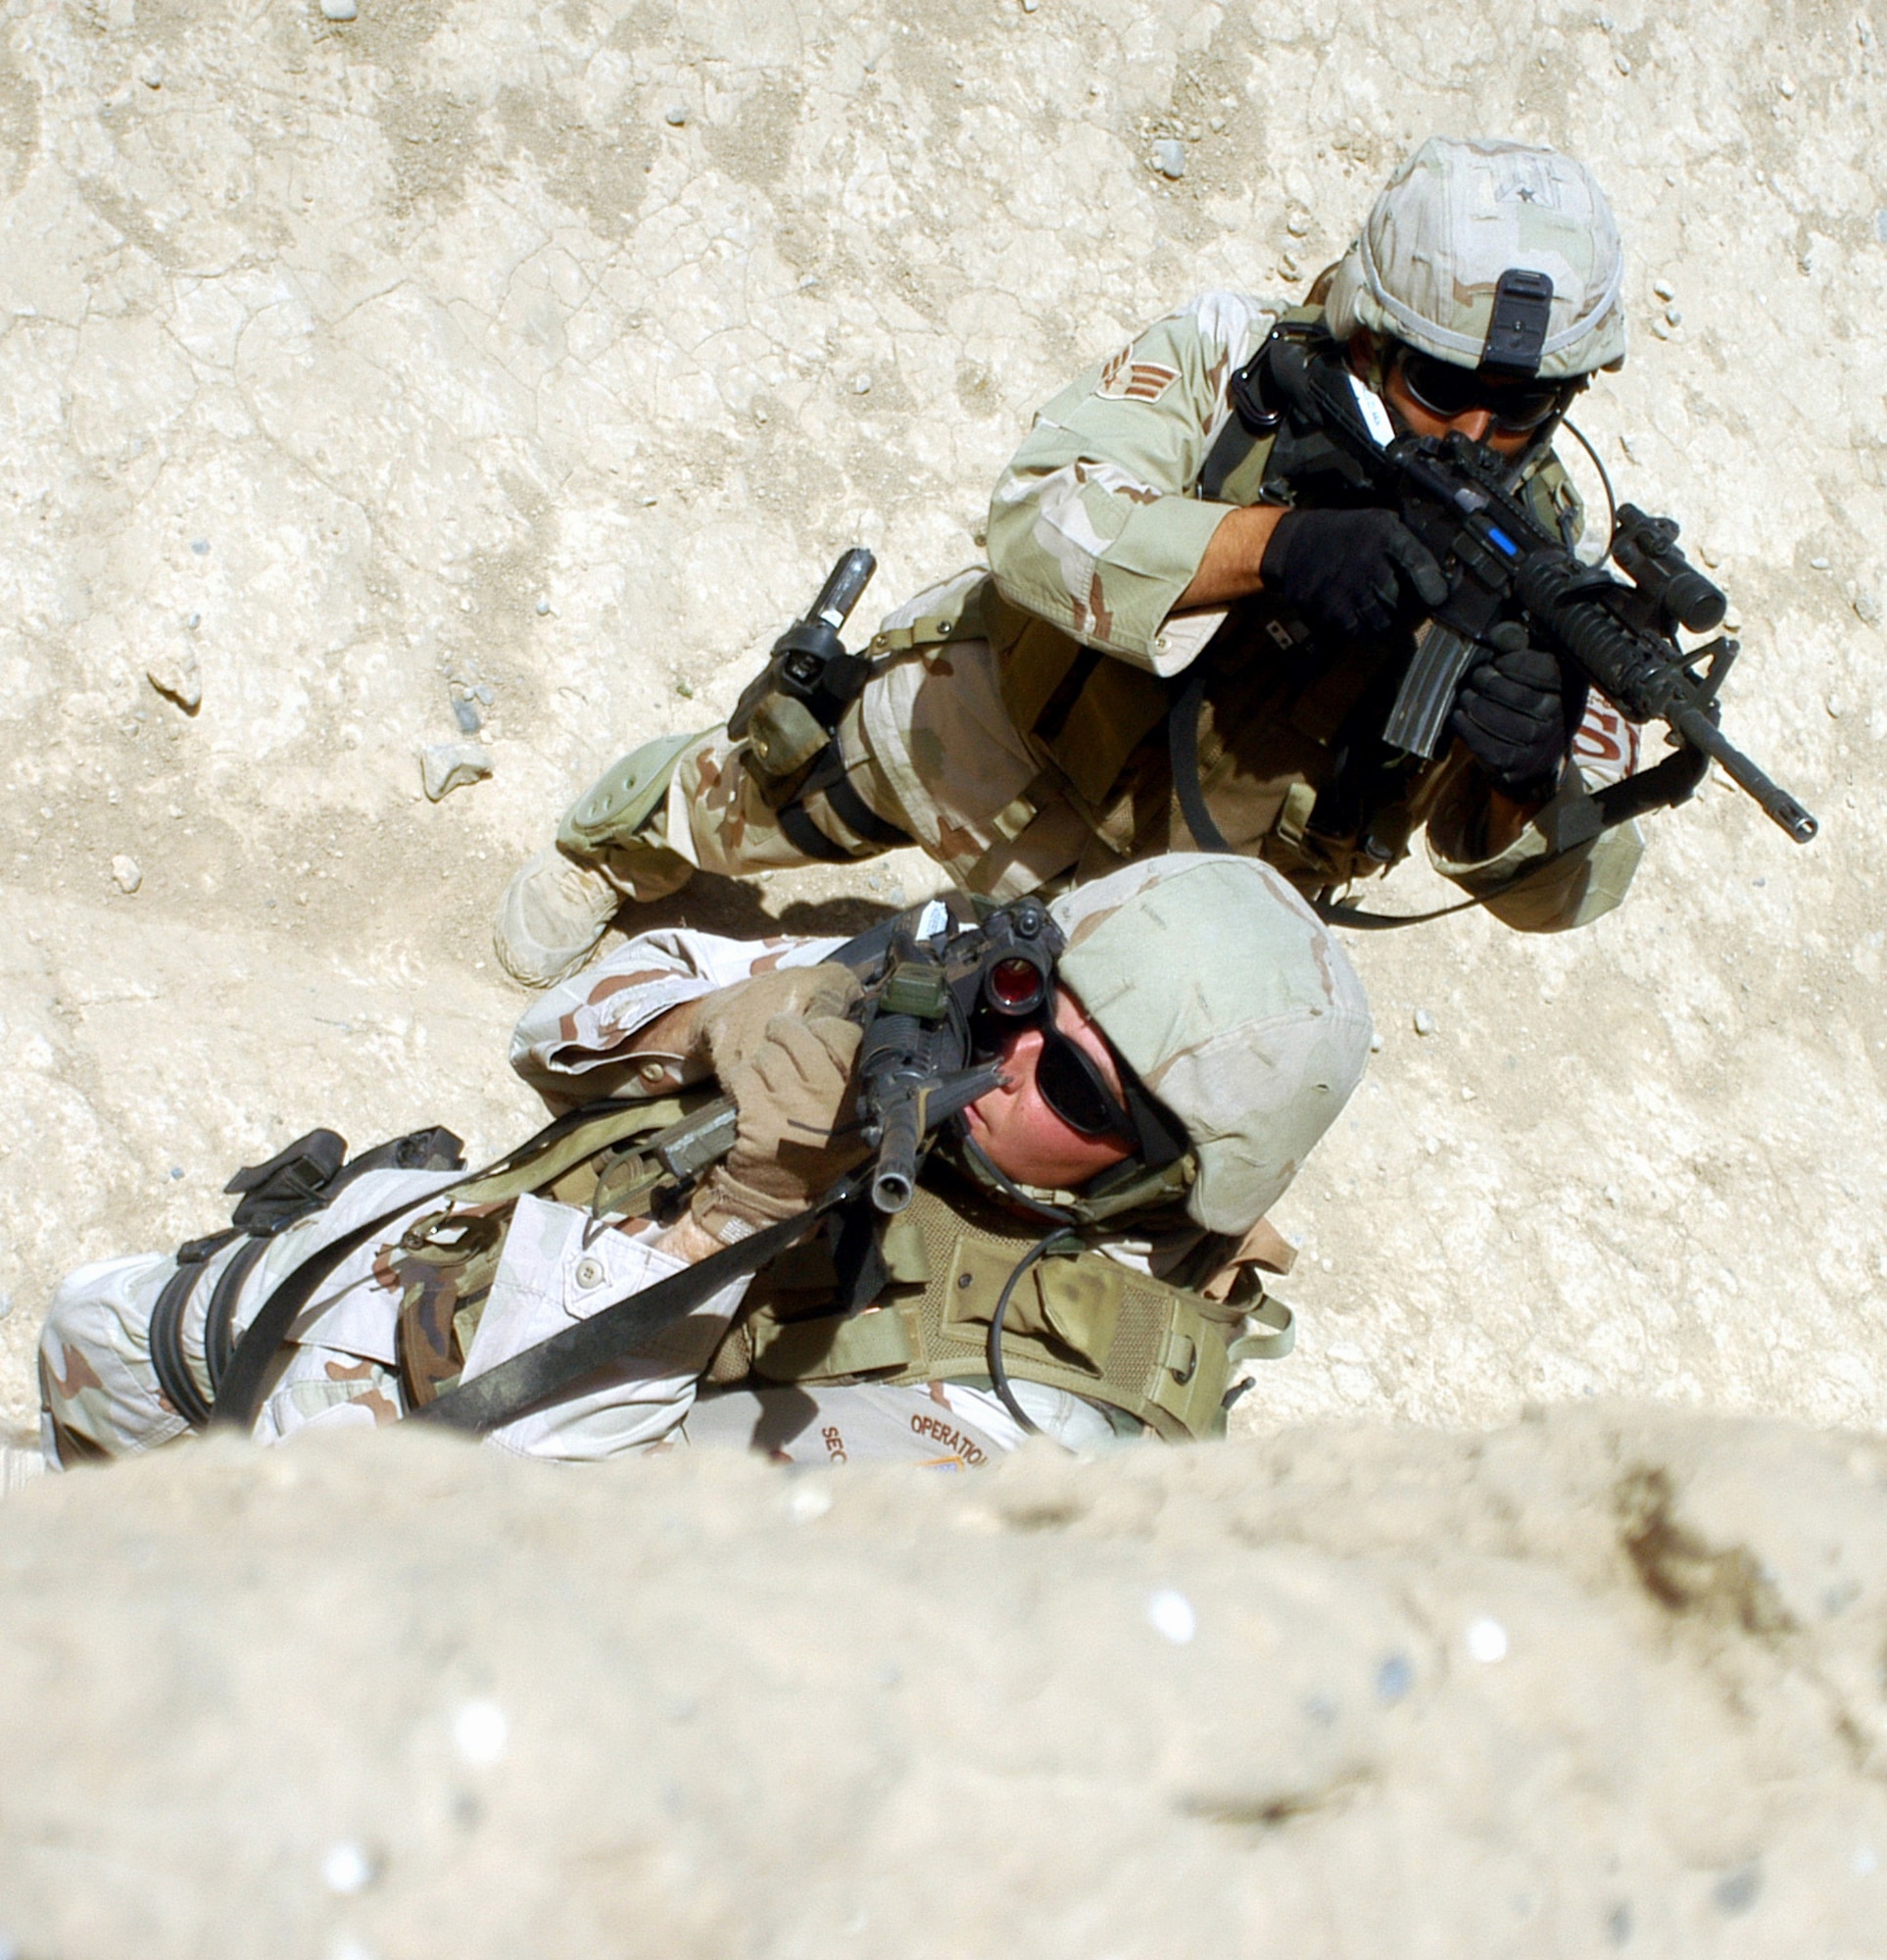 Senior Airman Charles Coles (foreground) covers a rooftop from the ground with an M-4 rifle during Military Operations in Urban Terrain training at Bagram Air Base, Afghanistan, on Tuesday, May 9, 2006. The facility here is designed to train Airmen and Soldiers in close-quarters combat with enemy forces. Airman Coles is with the 455th Expeditionary Security Forces Squadron. (U.S. Air Force photo/Maj. David Kurle)